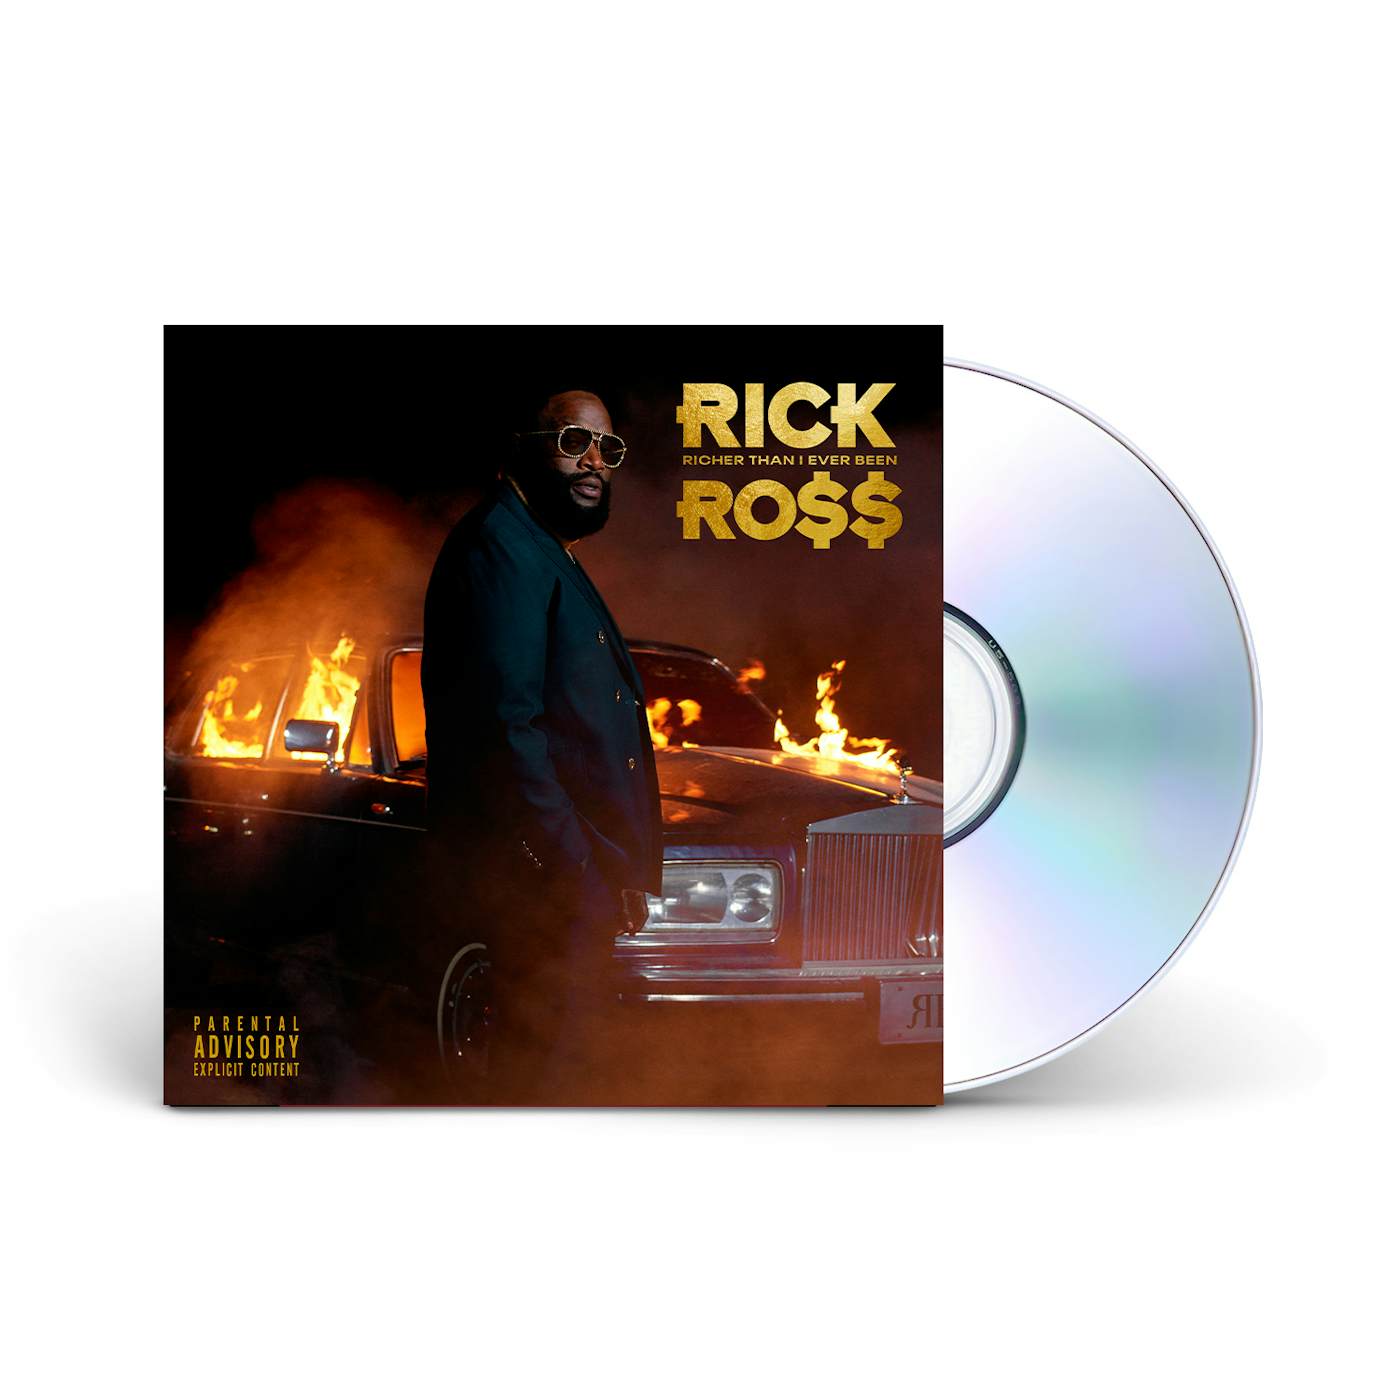 Rick Ross - Richer Than I Ever Been Deluxe CD